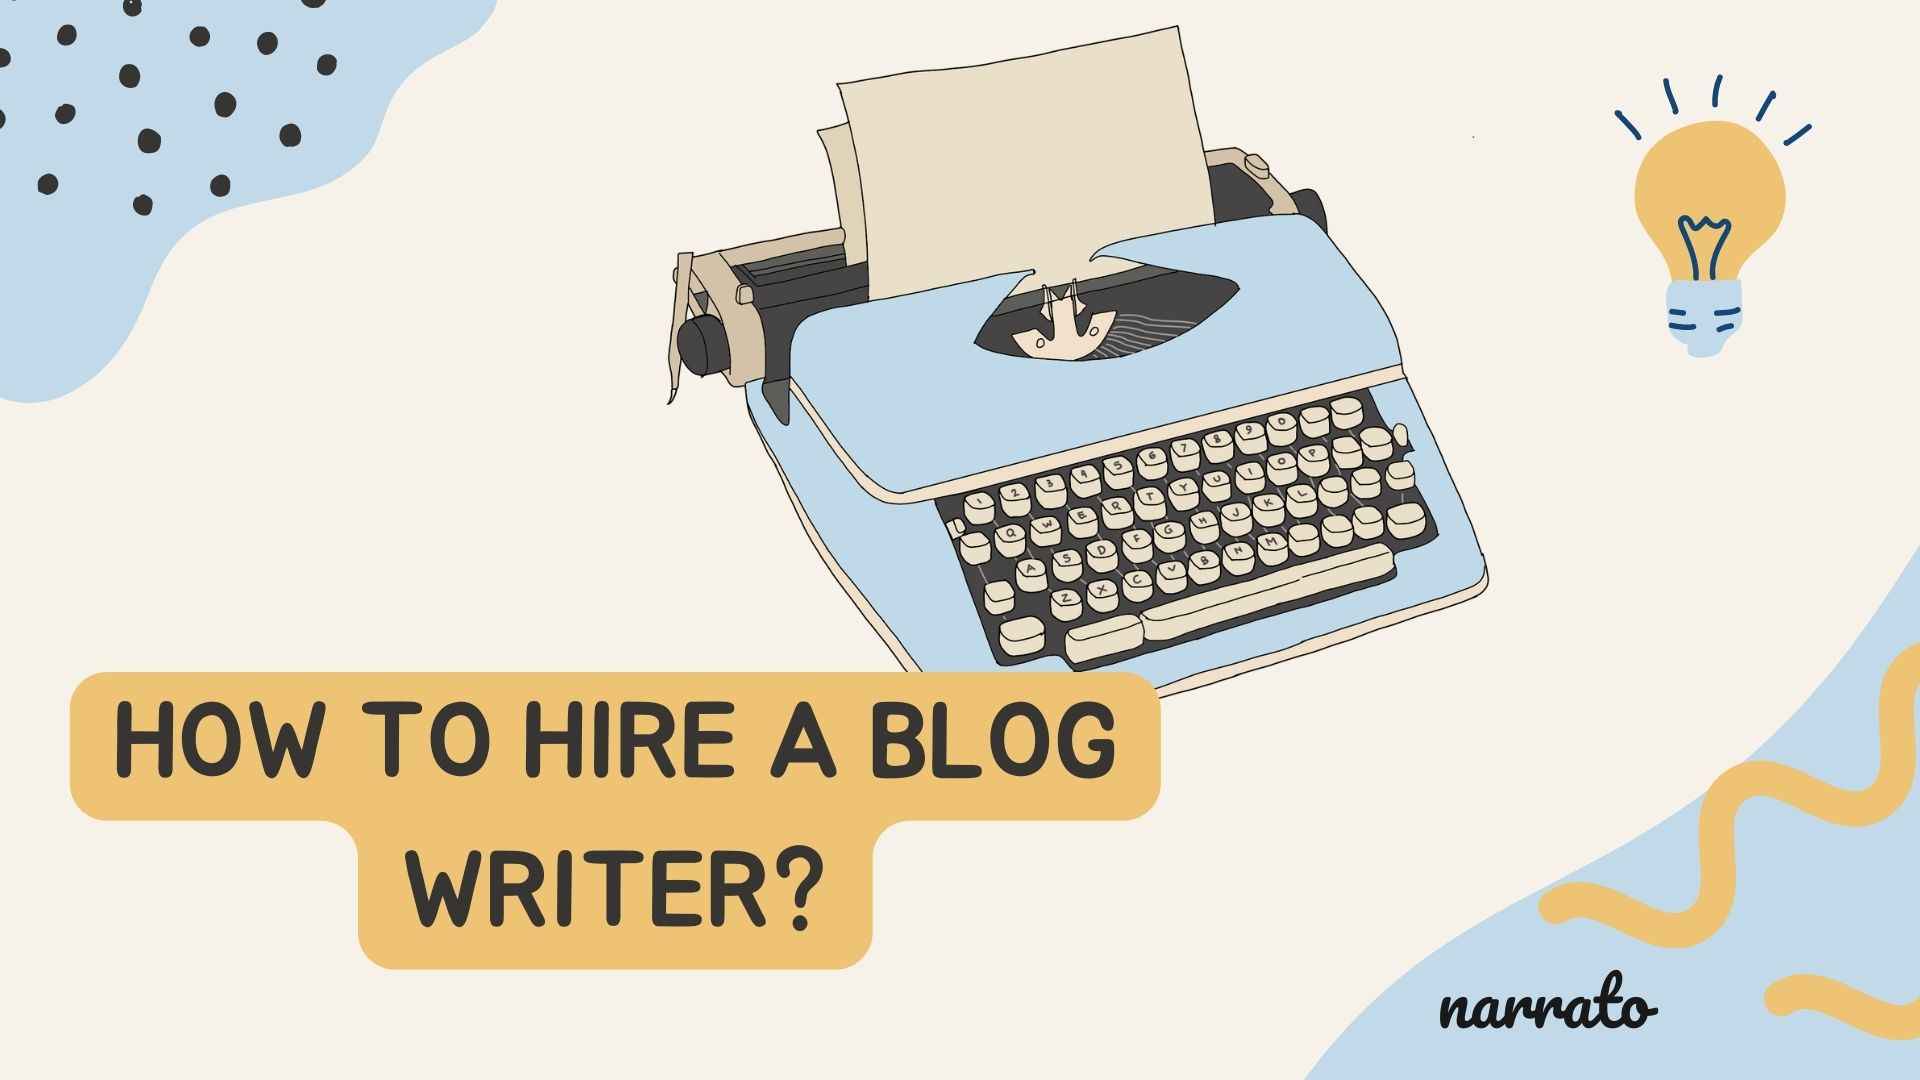 How To Start Freelance Content Writing